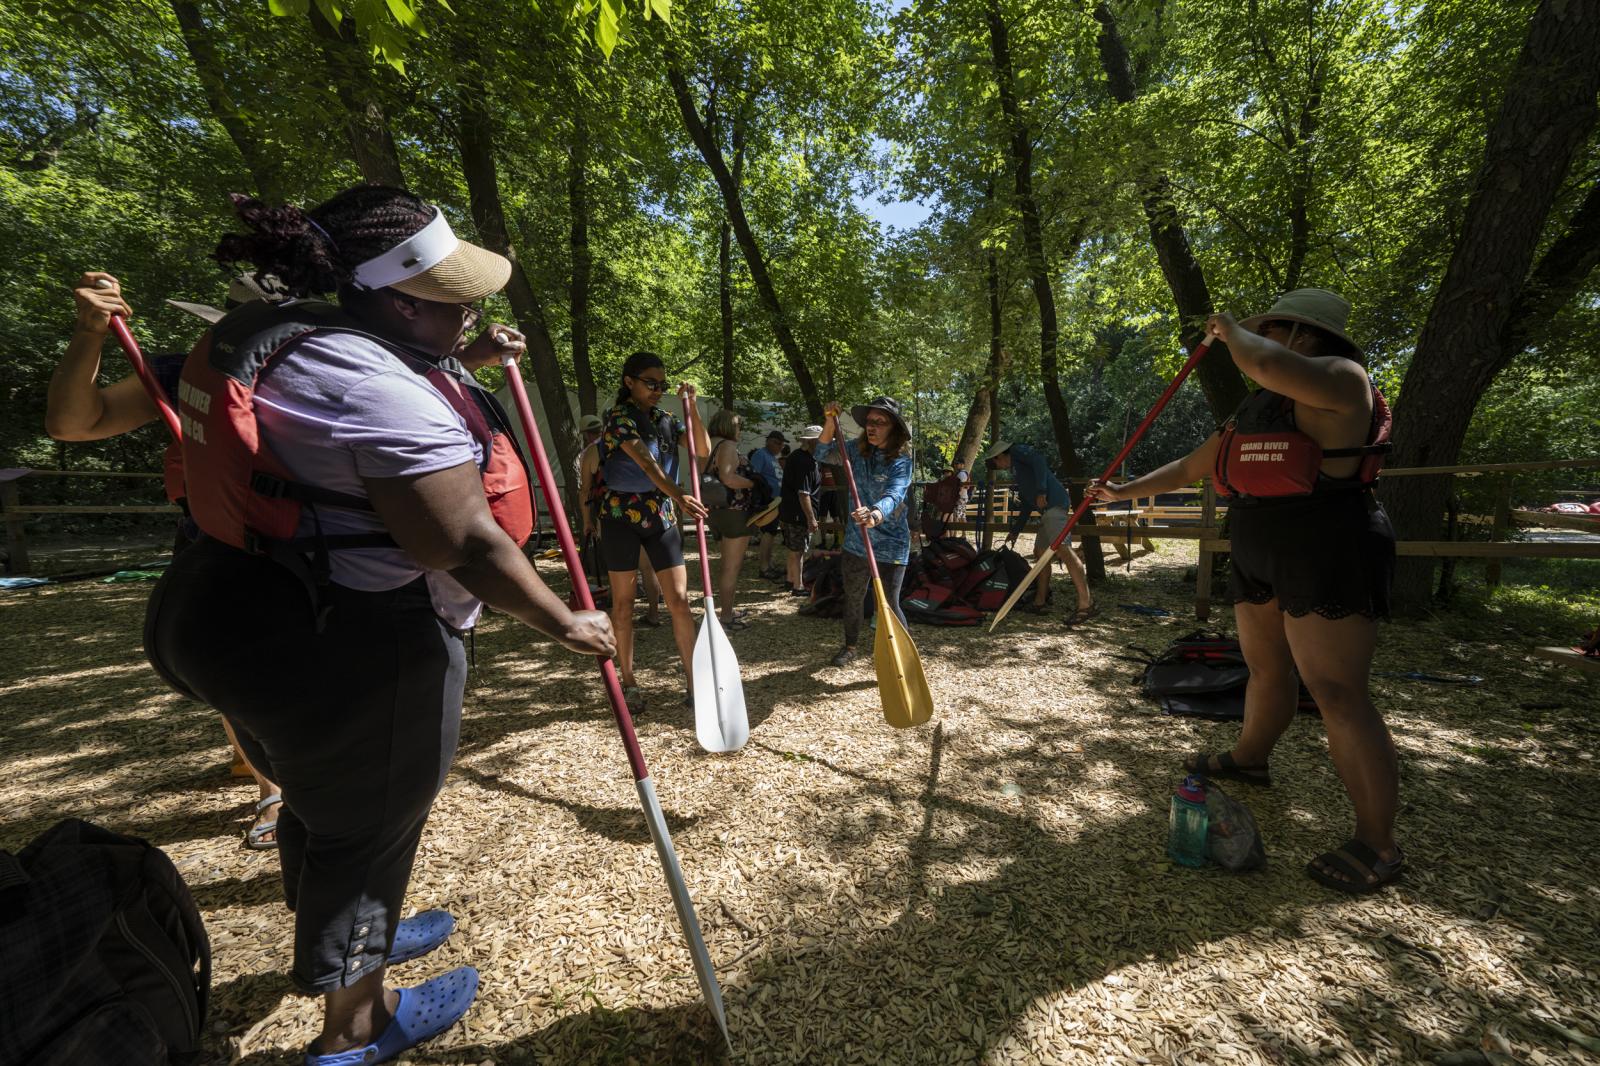 Rafting participants get a less...ing trip in its inaugural year.